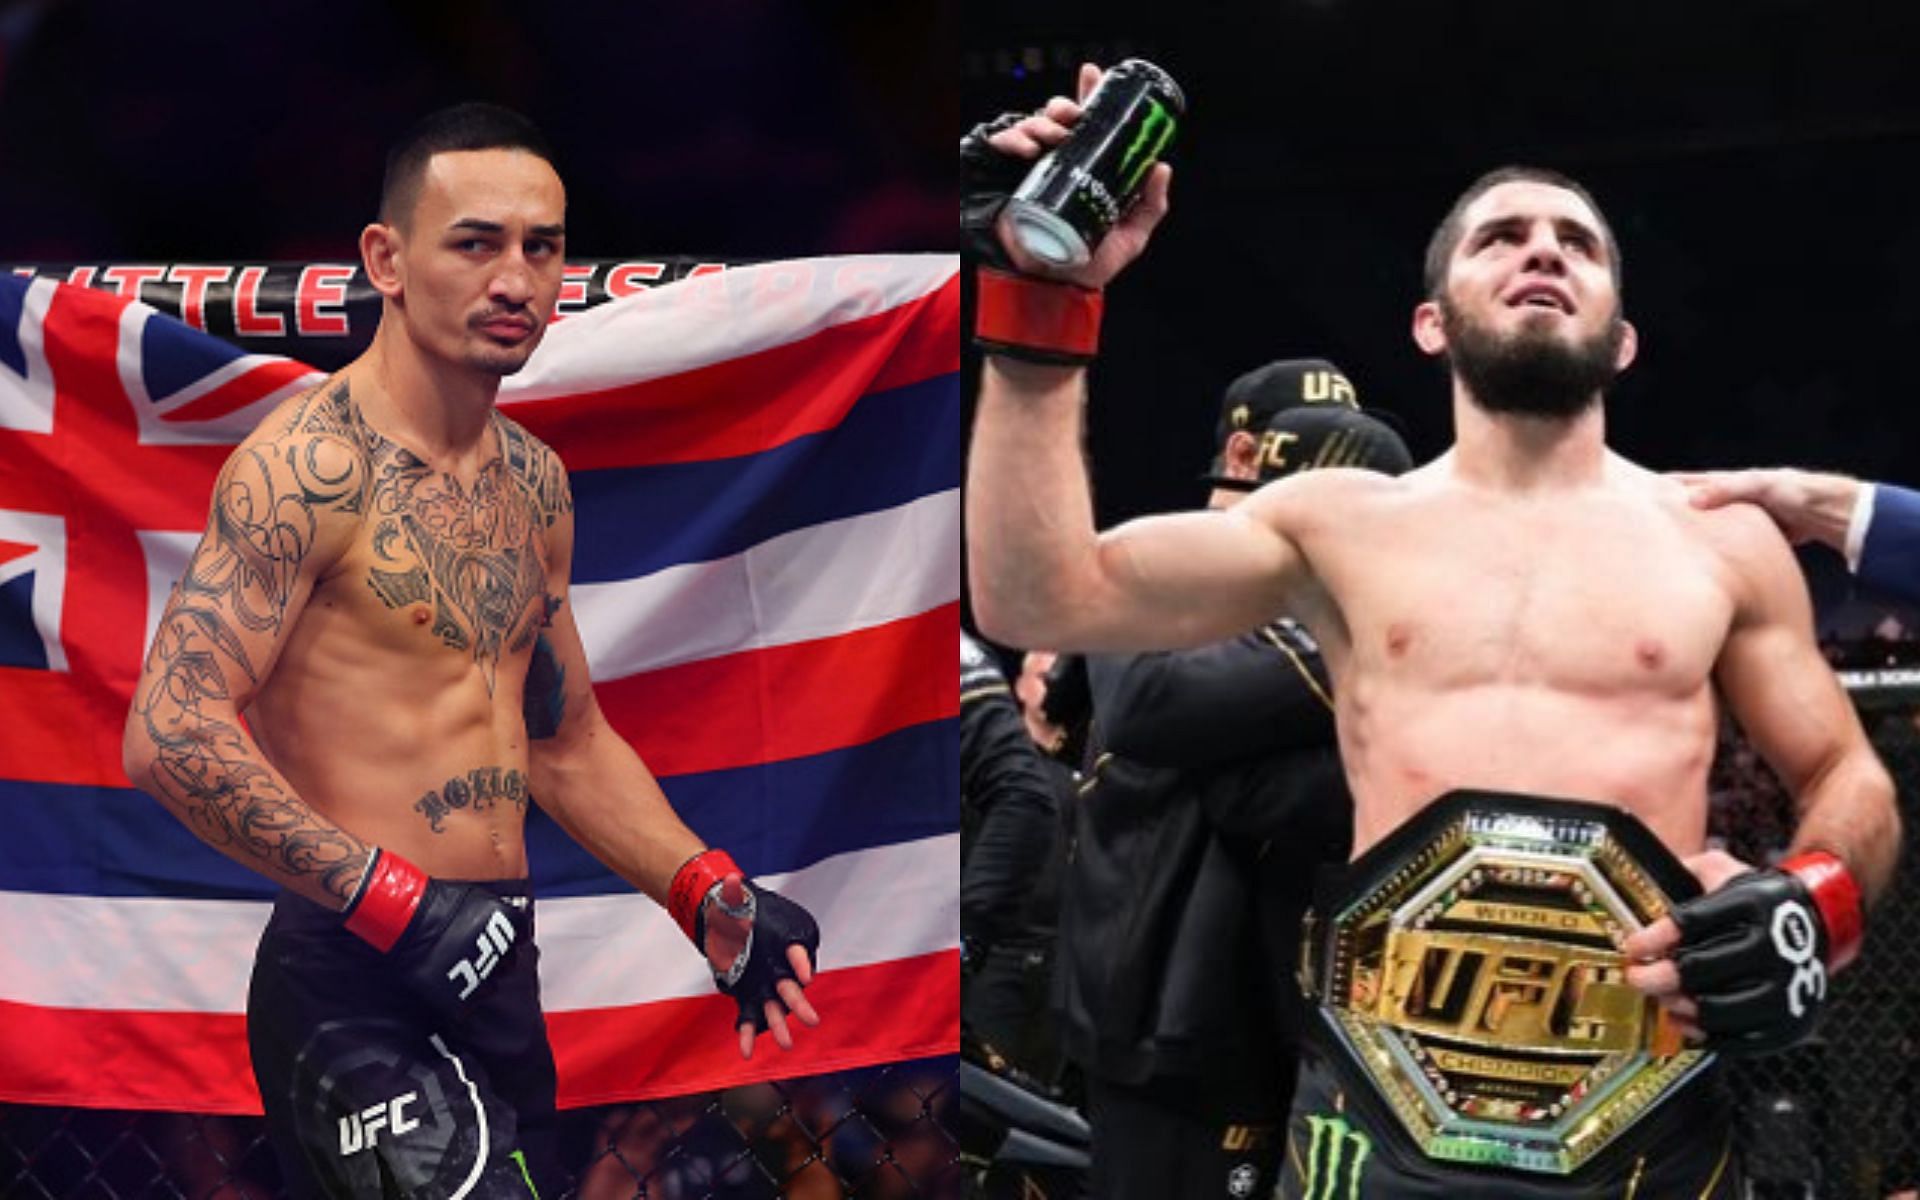 Max Holloway calls out Islam Makhachev [Image credits: Getty Images, @MAKHACHEVMMA/Twitter]